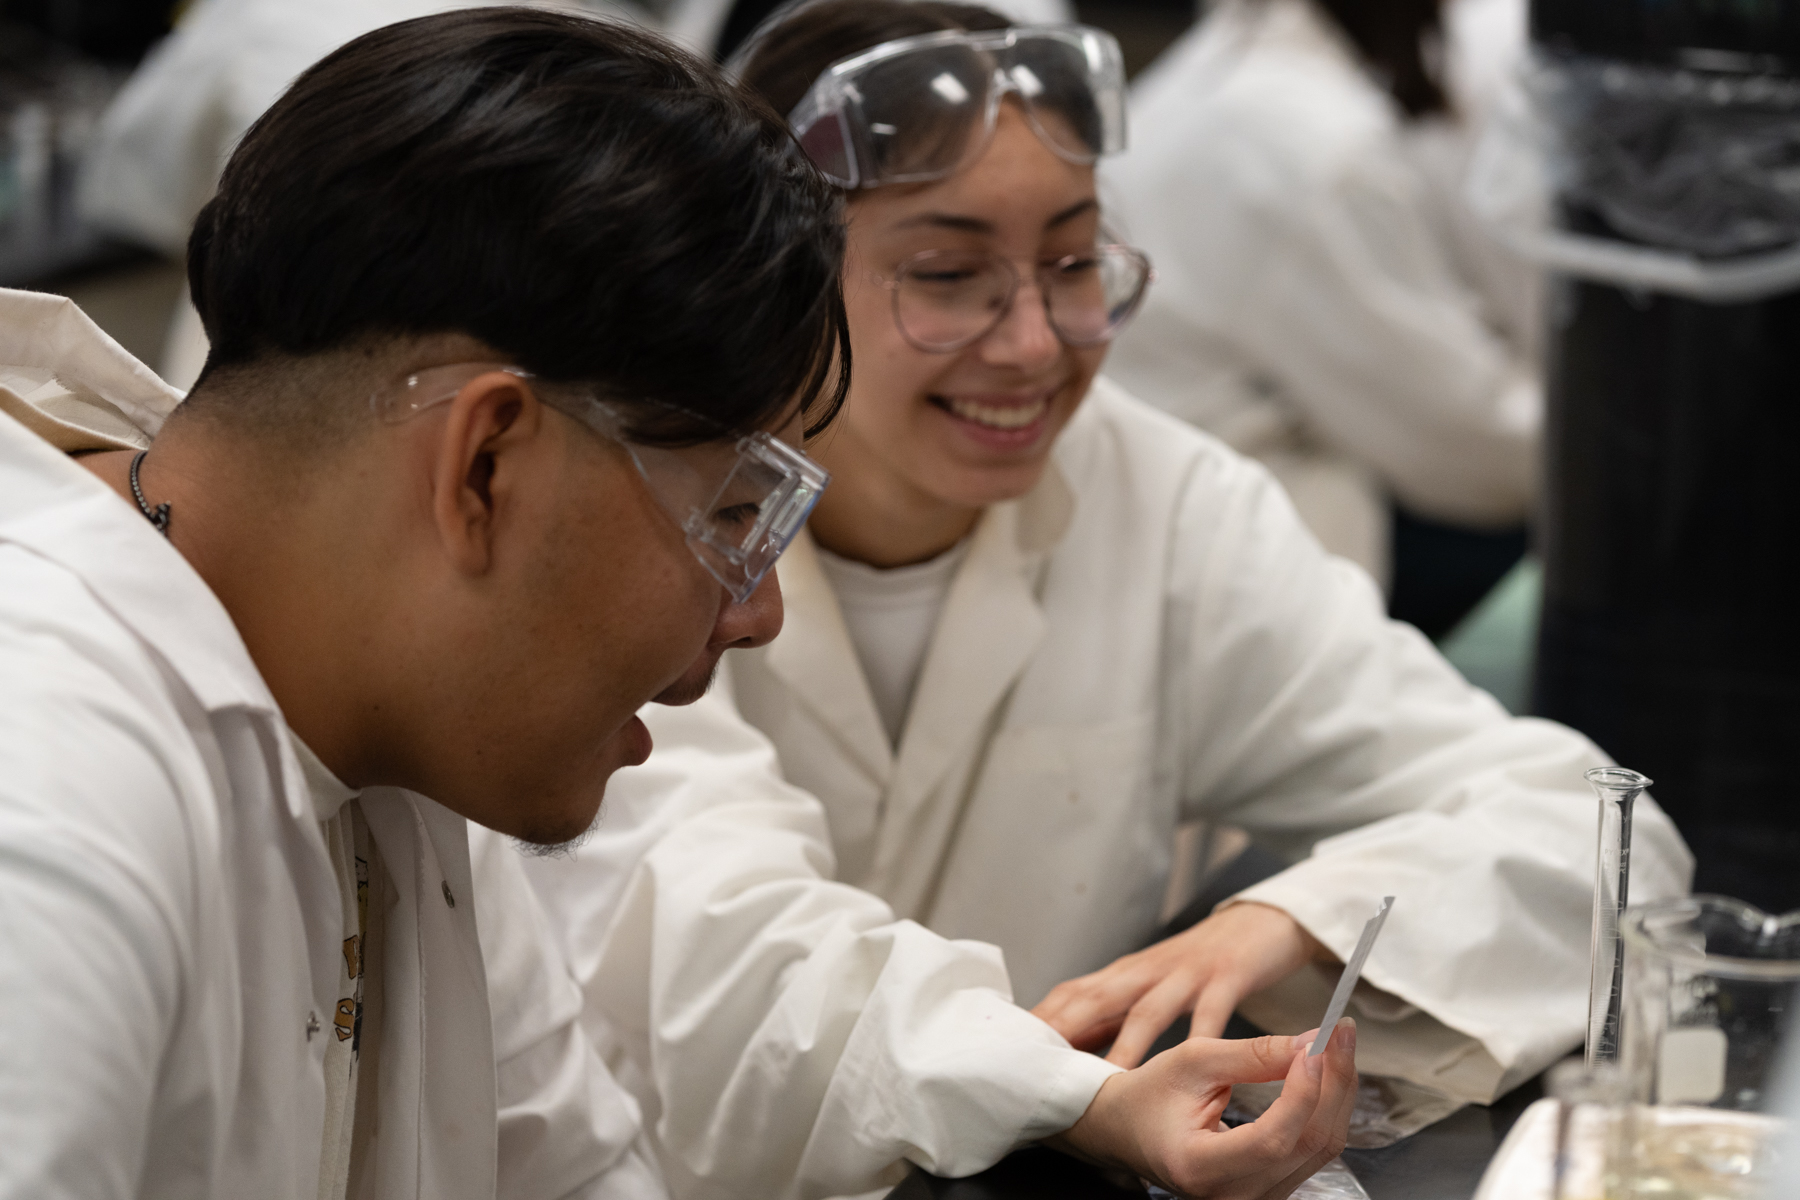 Two Moose Factory students in white lab coats performing an experiment with test tubes